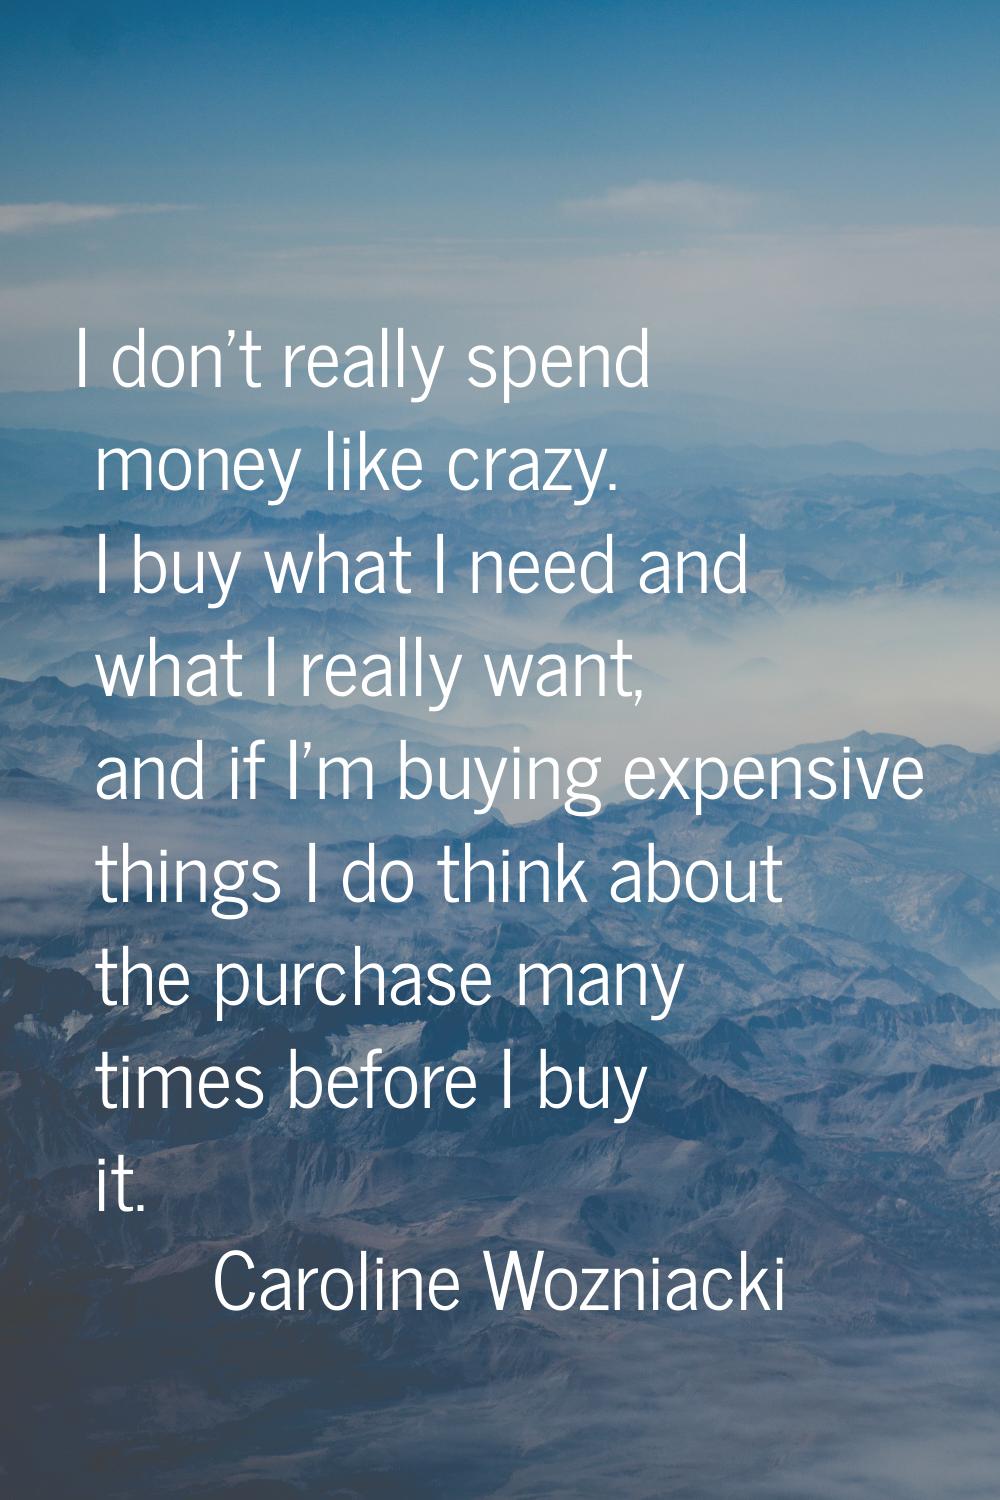 I don't really spend money like crazy. I buy what I need and what I really want, and if I'm buying 